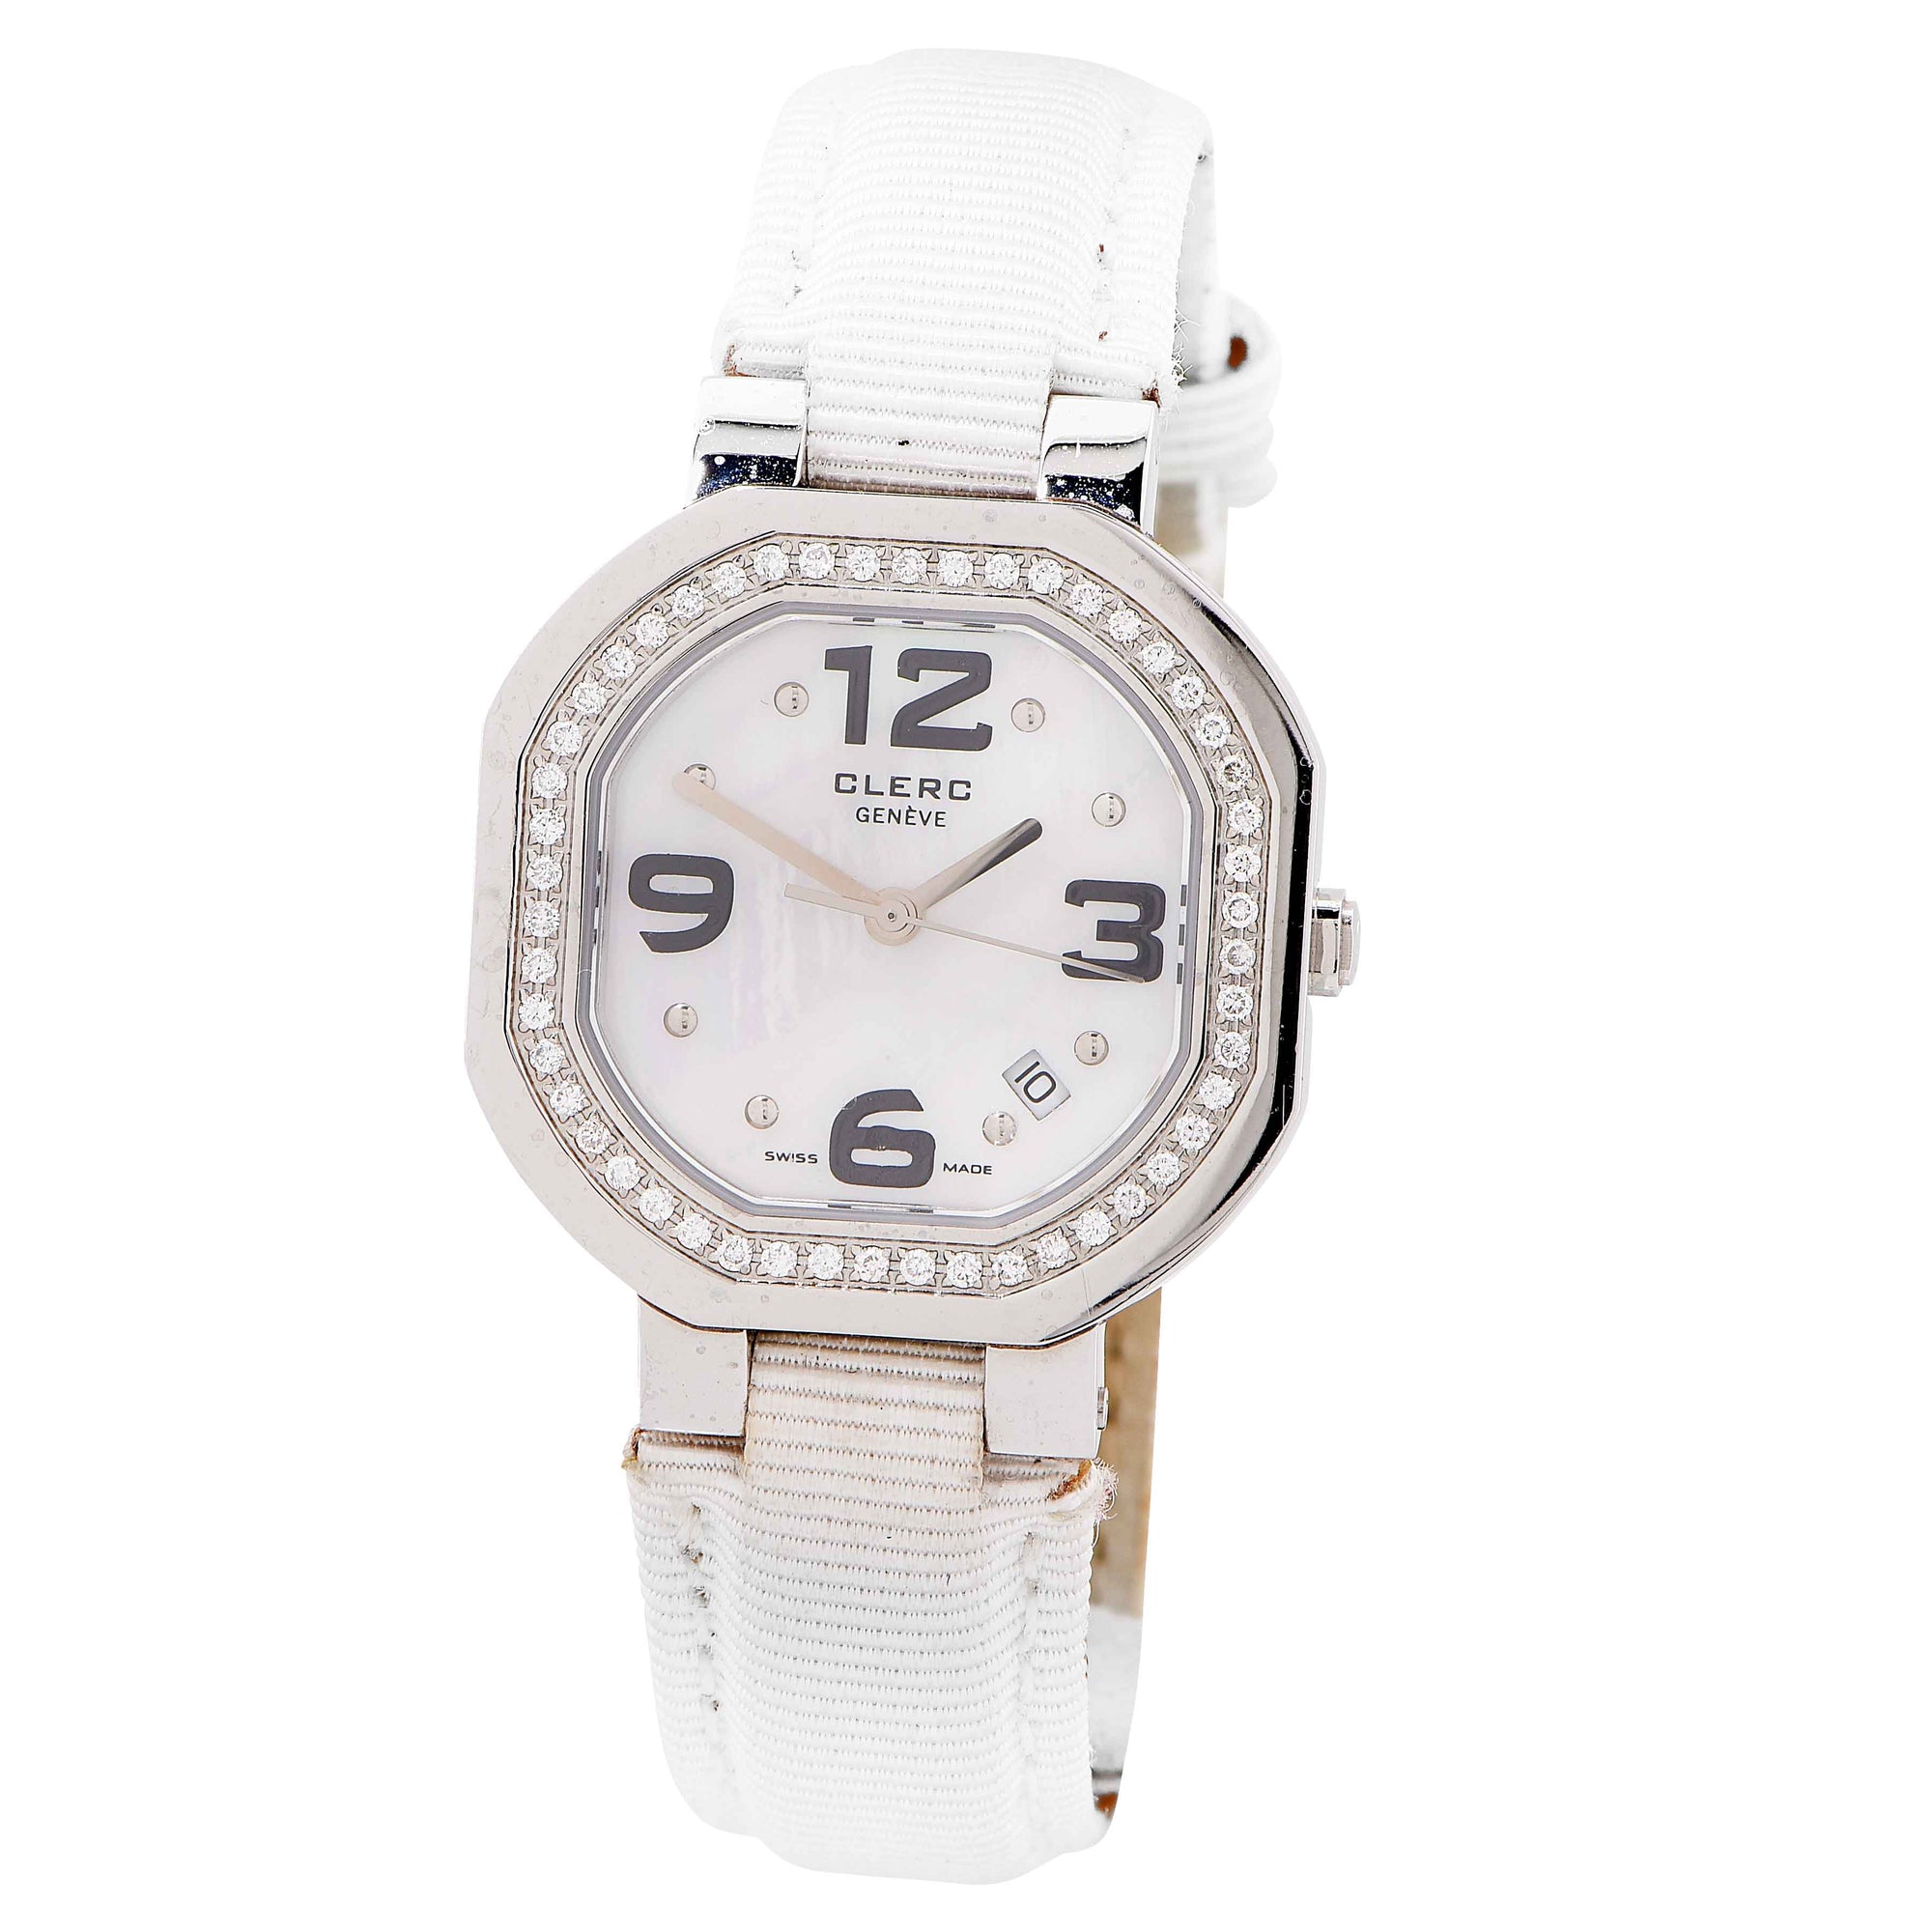 Clerc Ladies Stainless Steel Mother-of-Pearl Dial Diamond Bezel Wristwatch With White Leather Strap